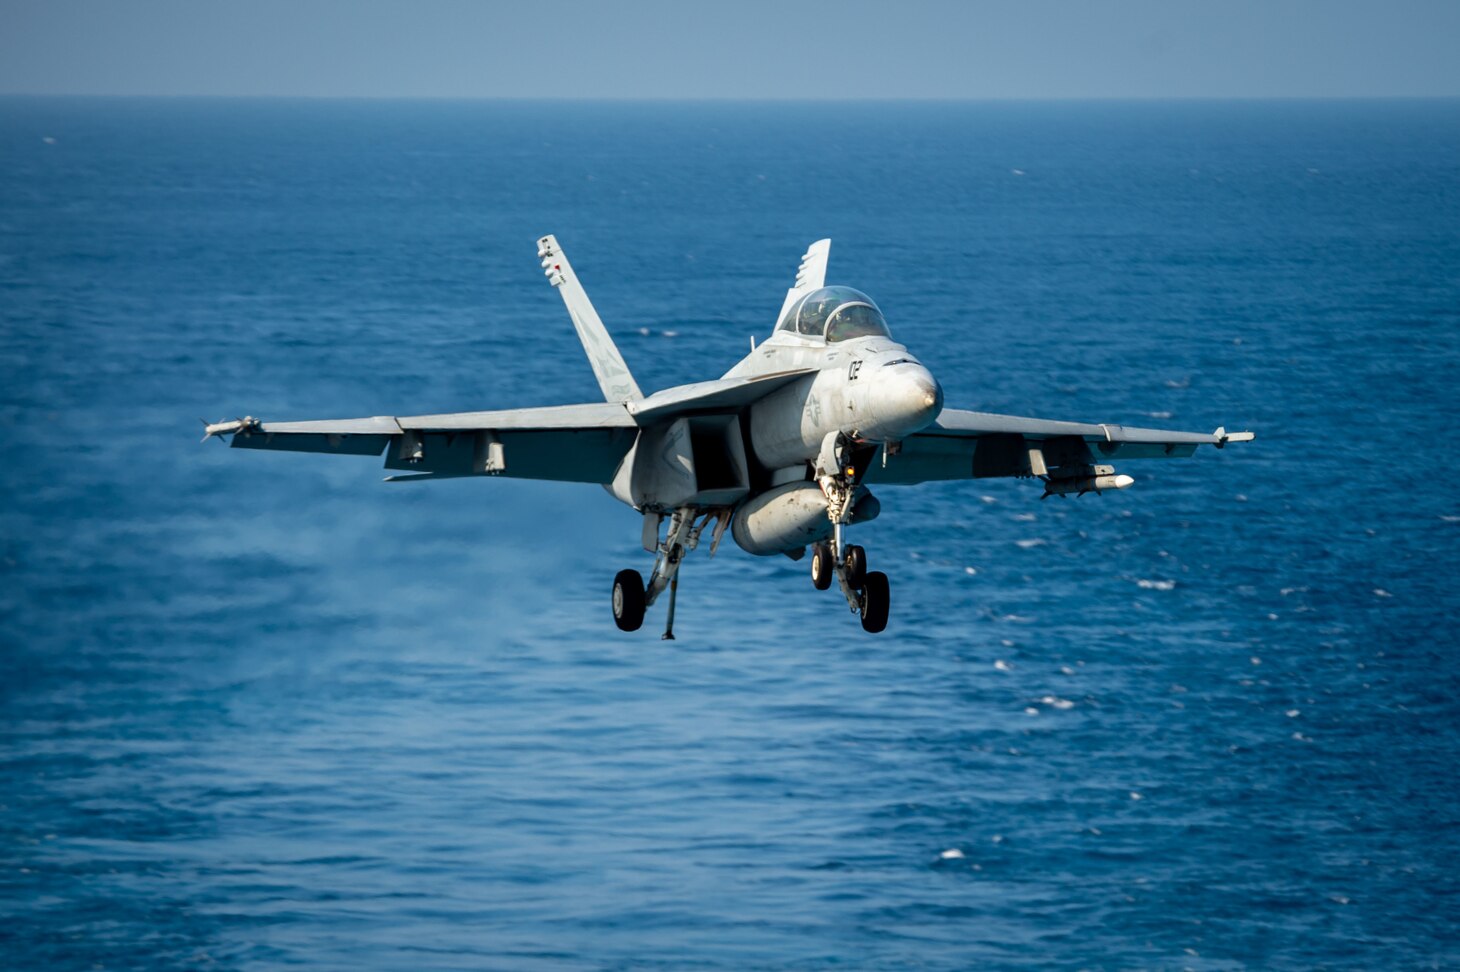 An F/A-18E Super Hornet, assigned to the "Bounty Hunters" of Strike Fighter Squadron (VFA) 2, prepares to recover on the flight deck of Nimitz-class aircraft carrier USS Carl Vinson (CVN 70).